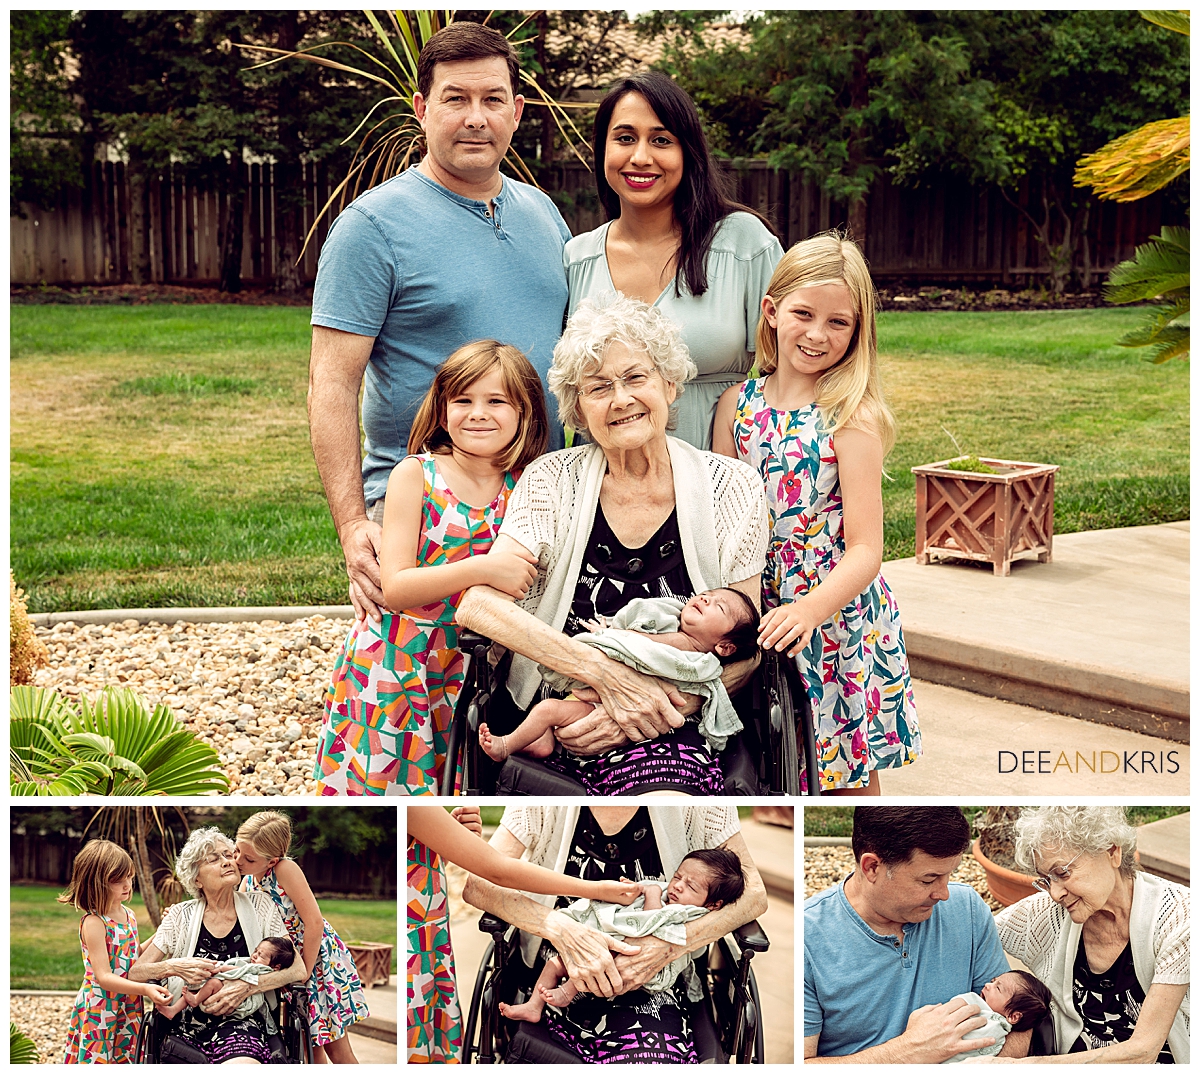 5 images of grandma with her beautiful family including her son, daughter-in-law, two granddaughters, and her new grandson.